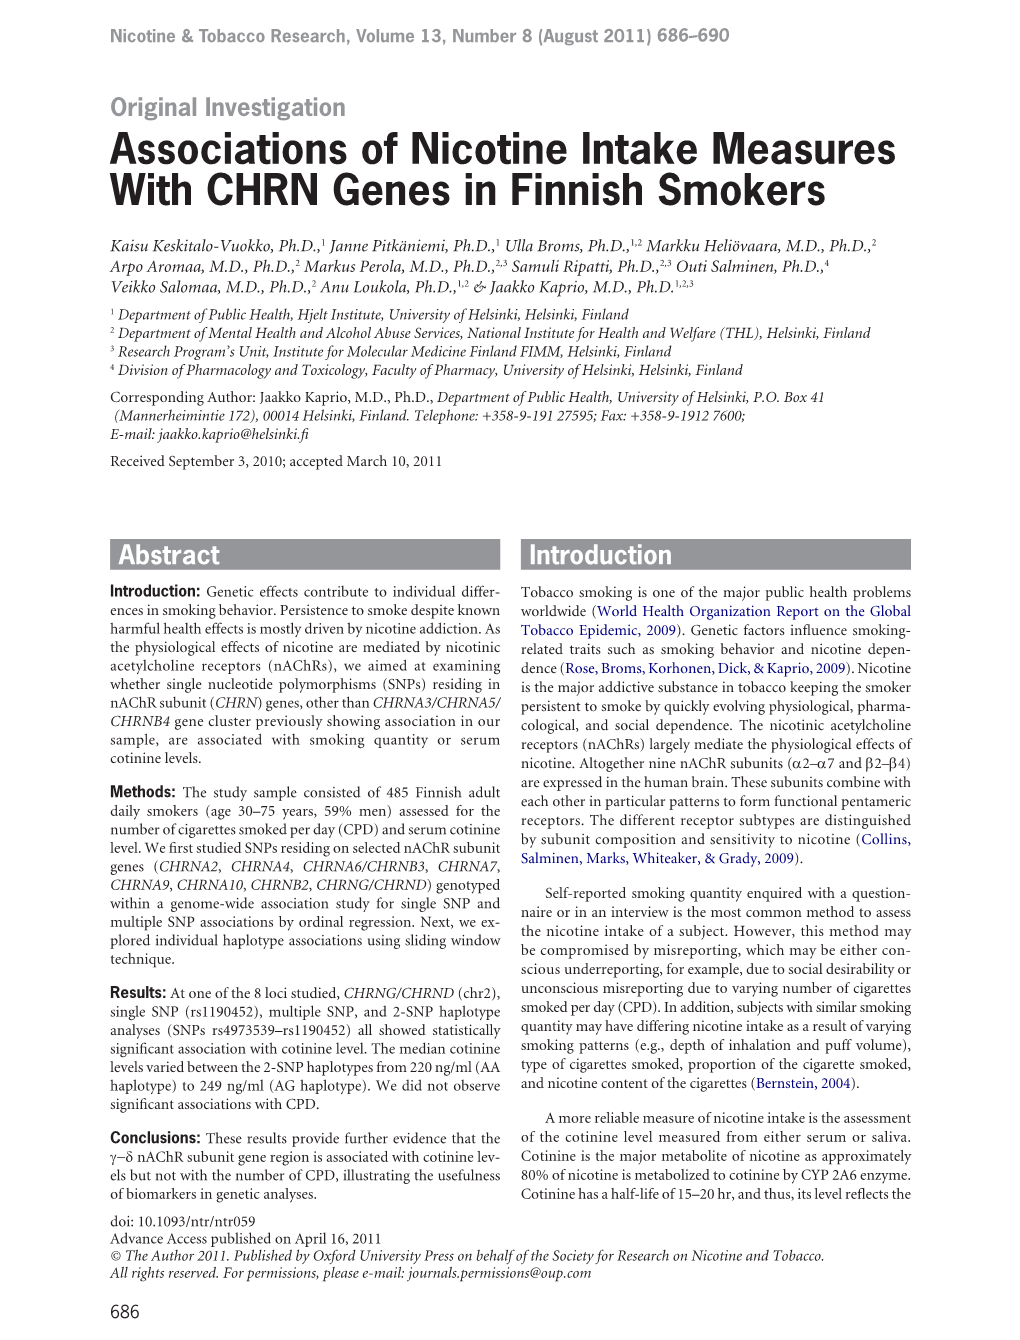 Associations of Nicotine Intake Measures with CHRN Genes in Finnish Smokers